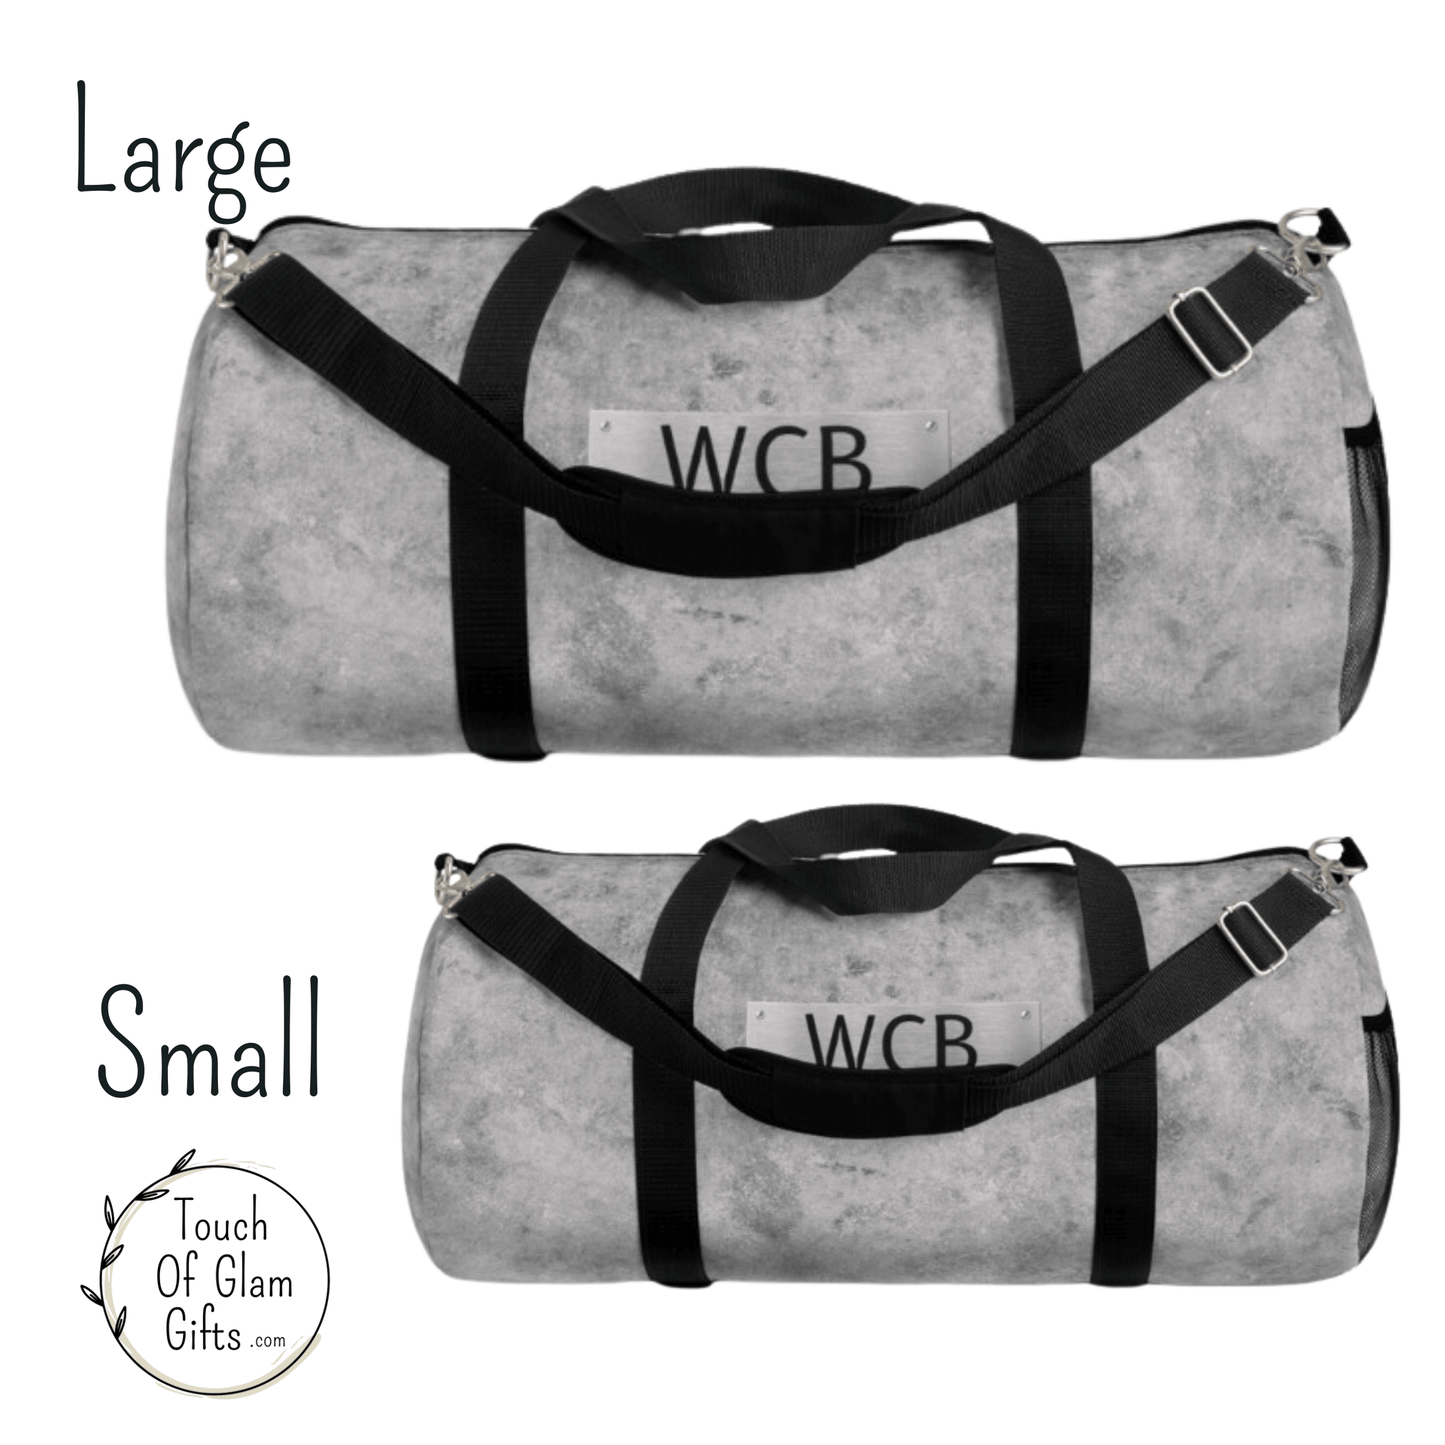 The front of the mens weekend bag has a printed steel plate with black monogrammed letters for your initials. The large and small bag are identical. 